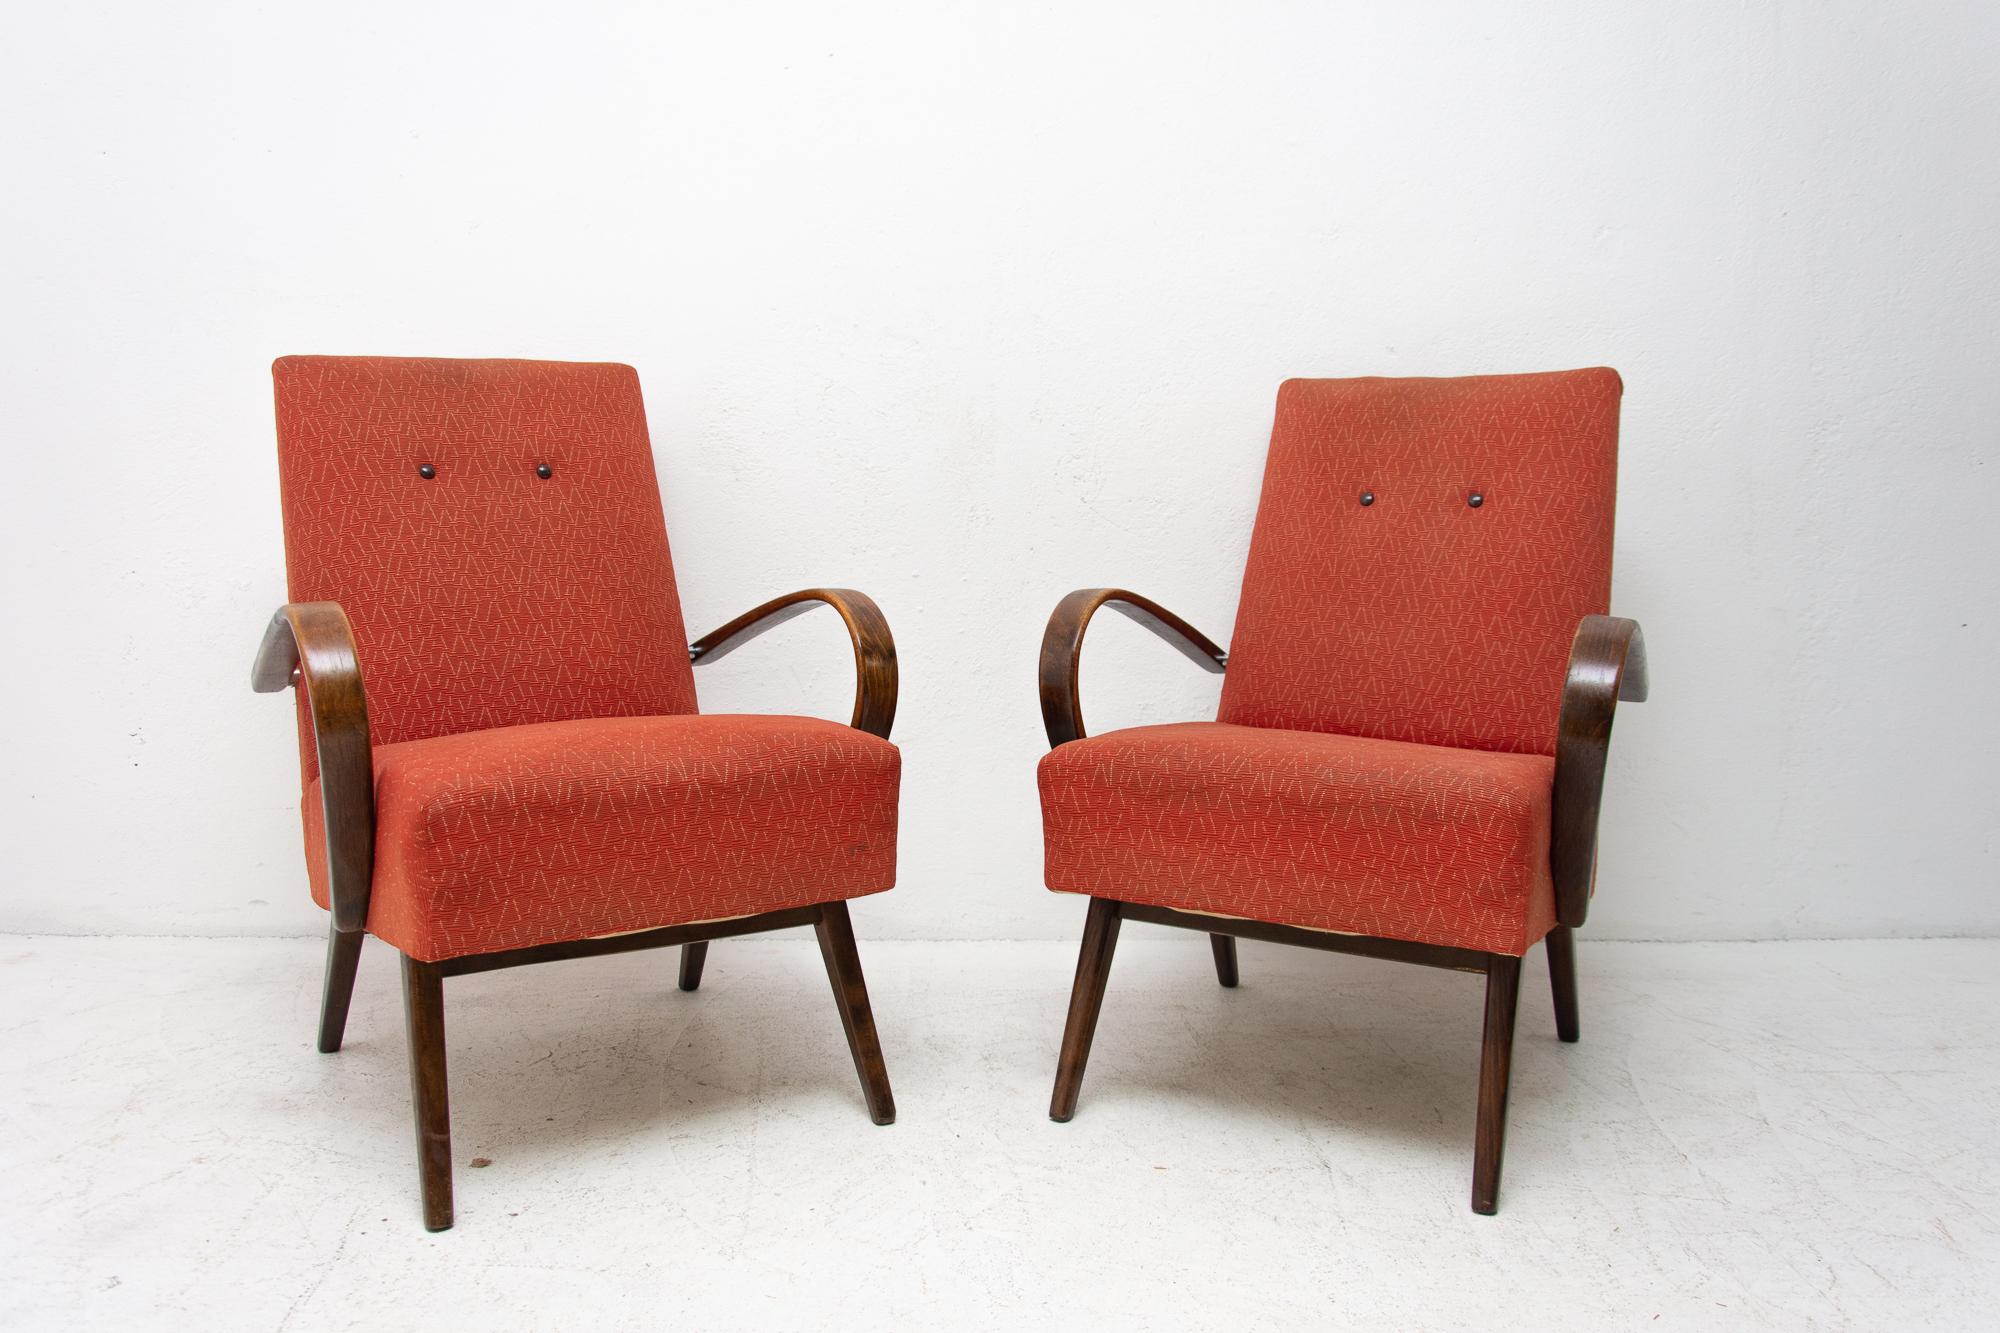 These bentwood armchairs were designed by Jaroslav Šmídek and made in the former Czechoslovakia in the 1960s.

The chairs are stable and comfortable. They are in good vintage condition, bearing signs of age and using.

Price is for the pair.